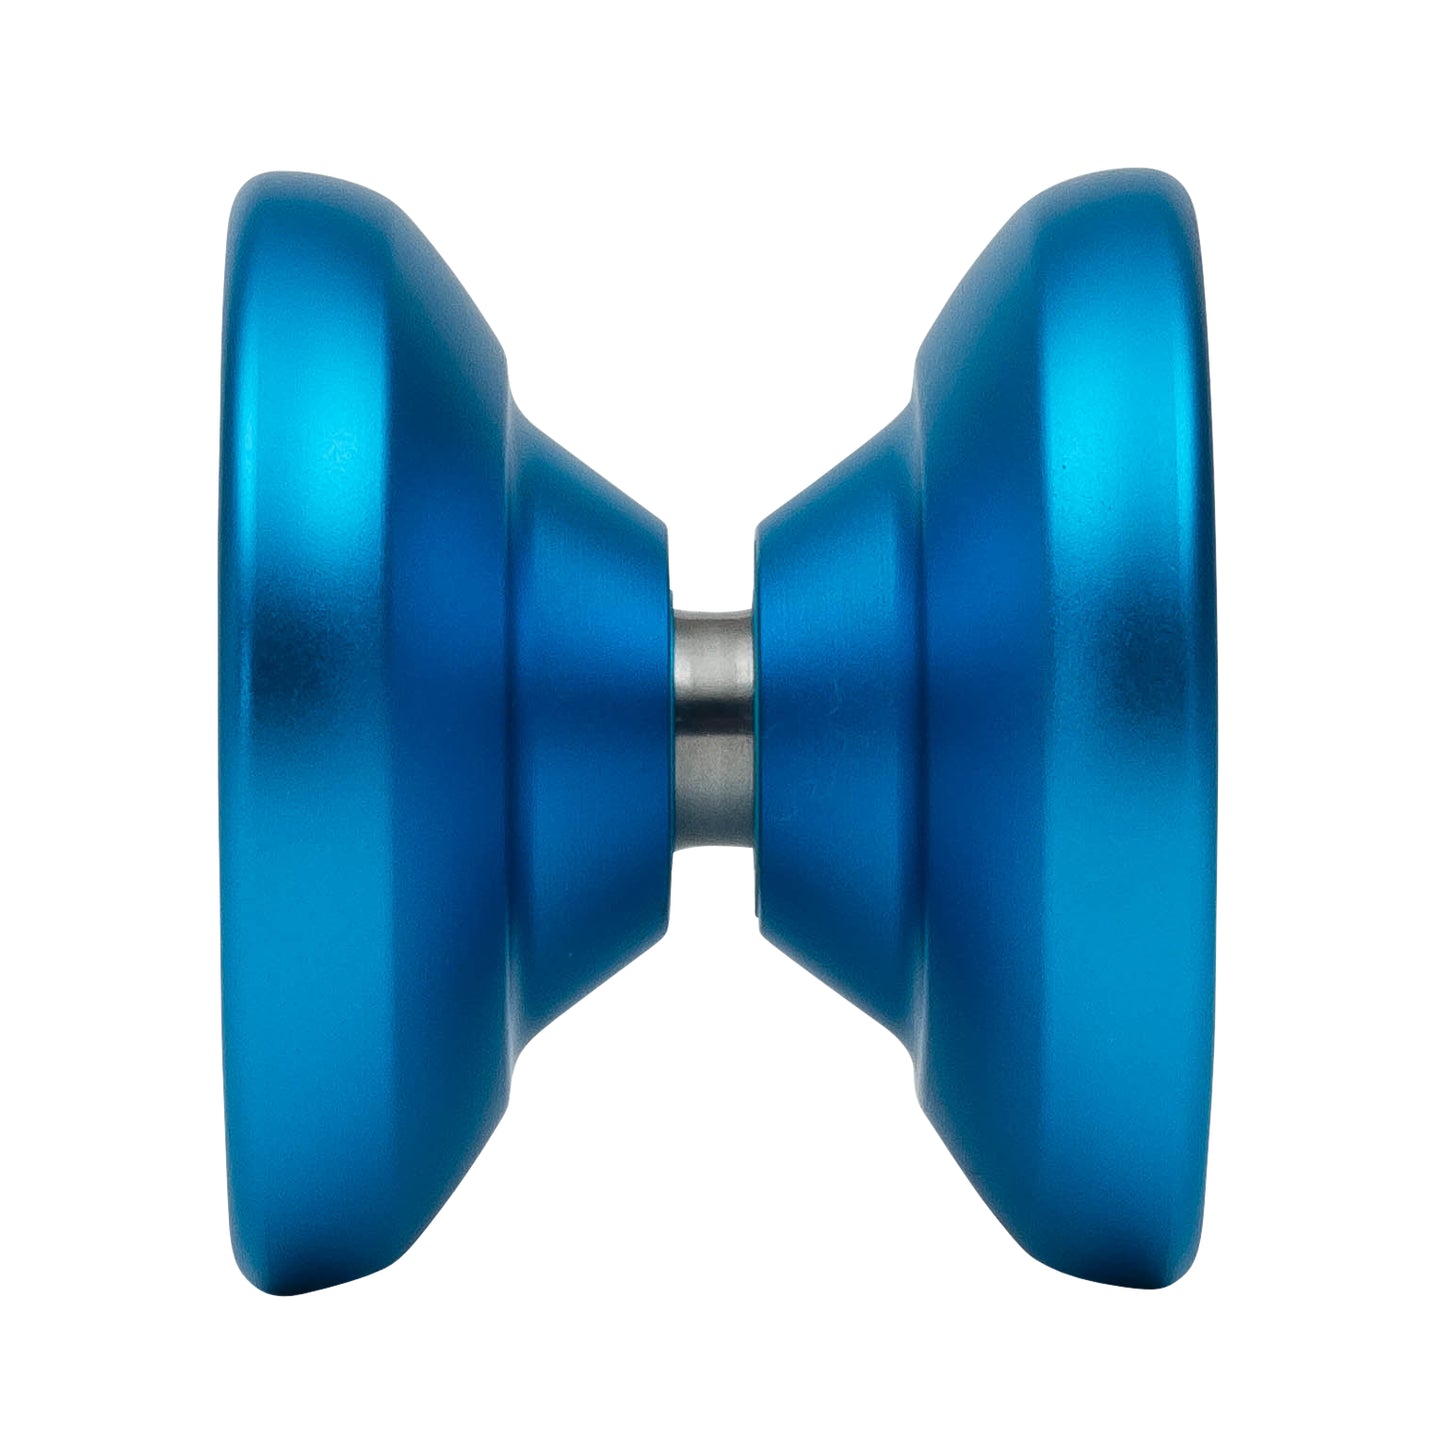 Shutter Wide Angle YoYo blue front view